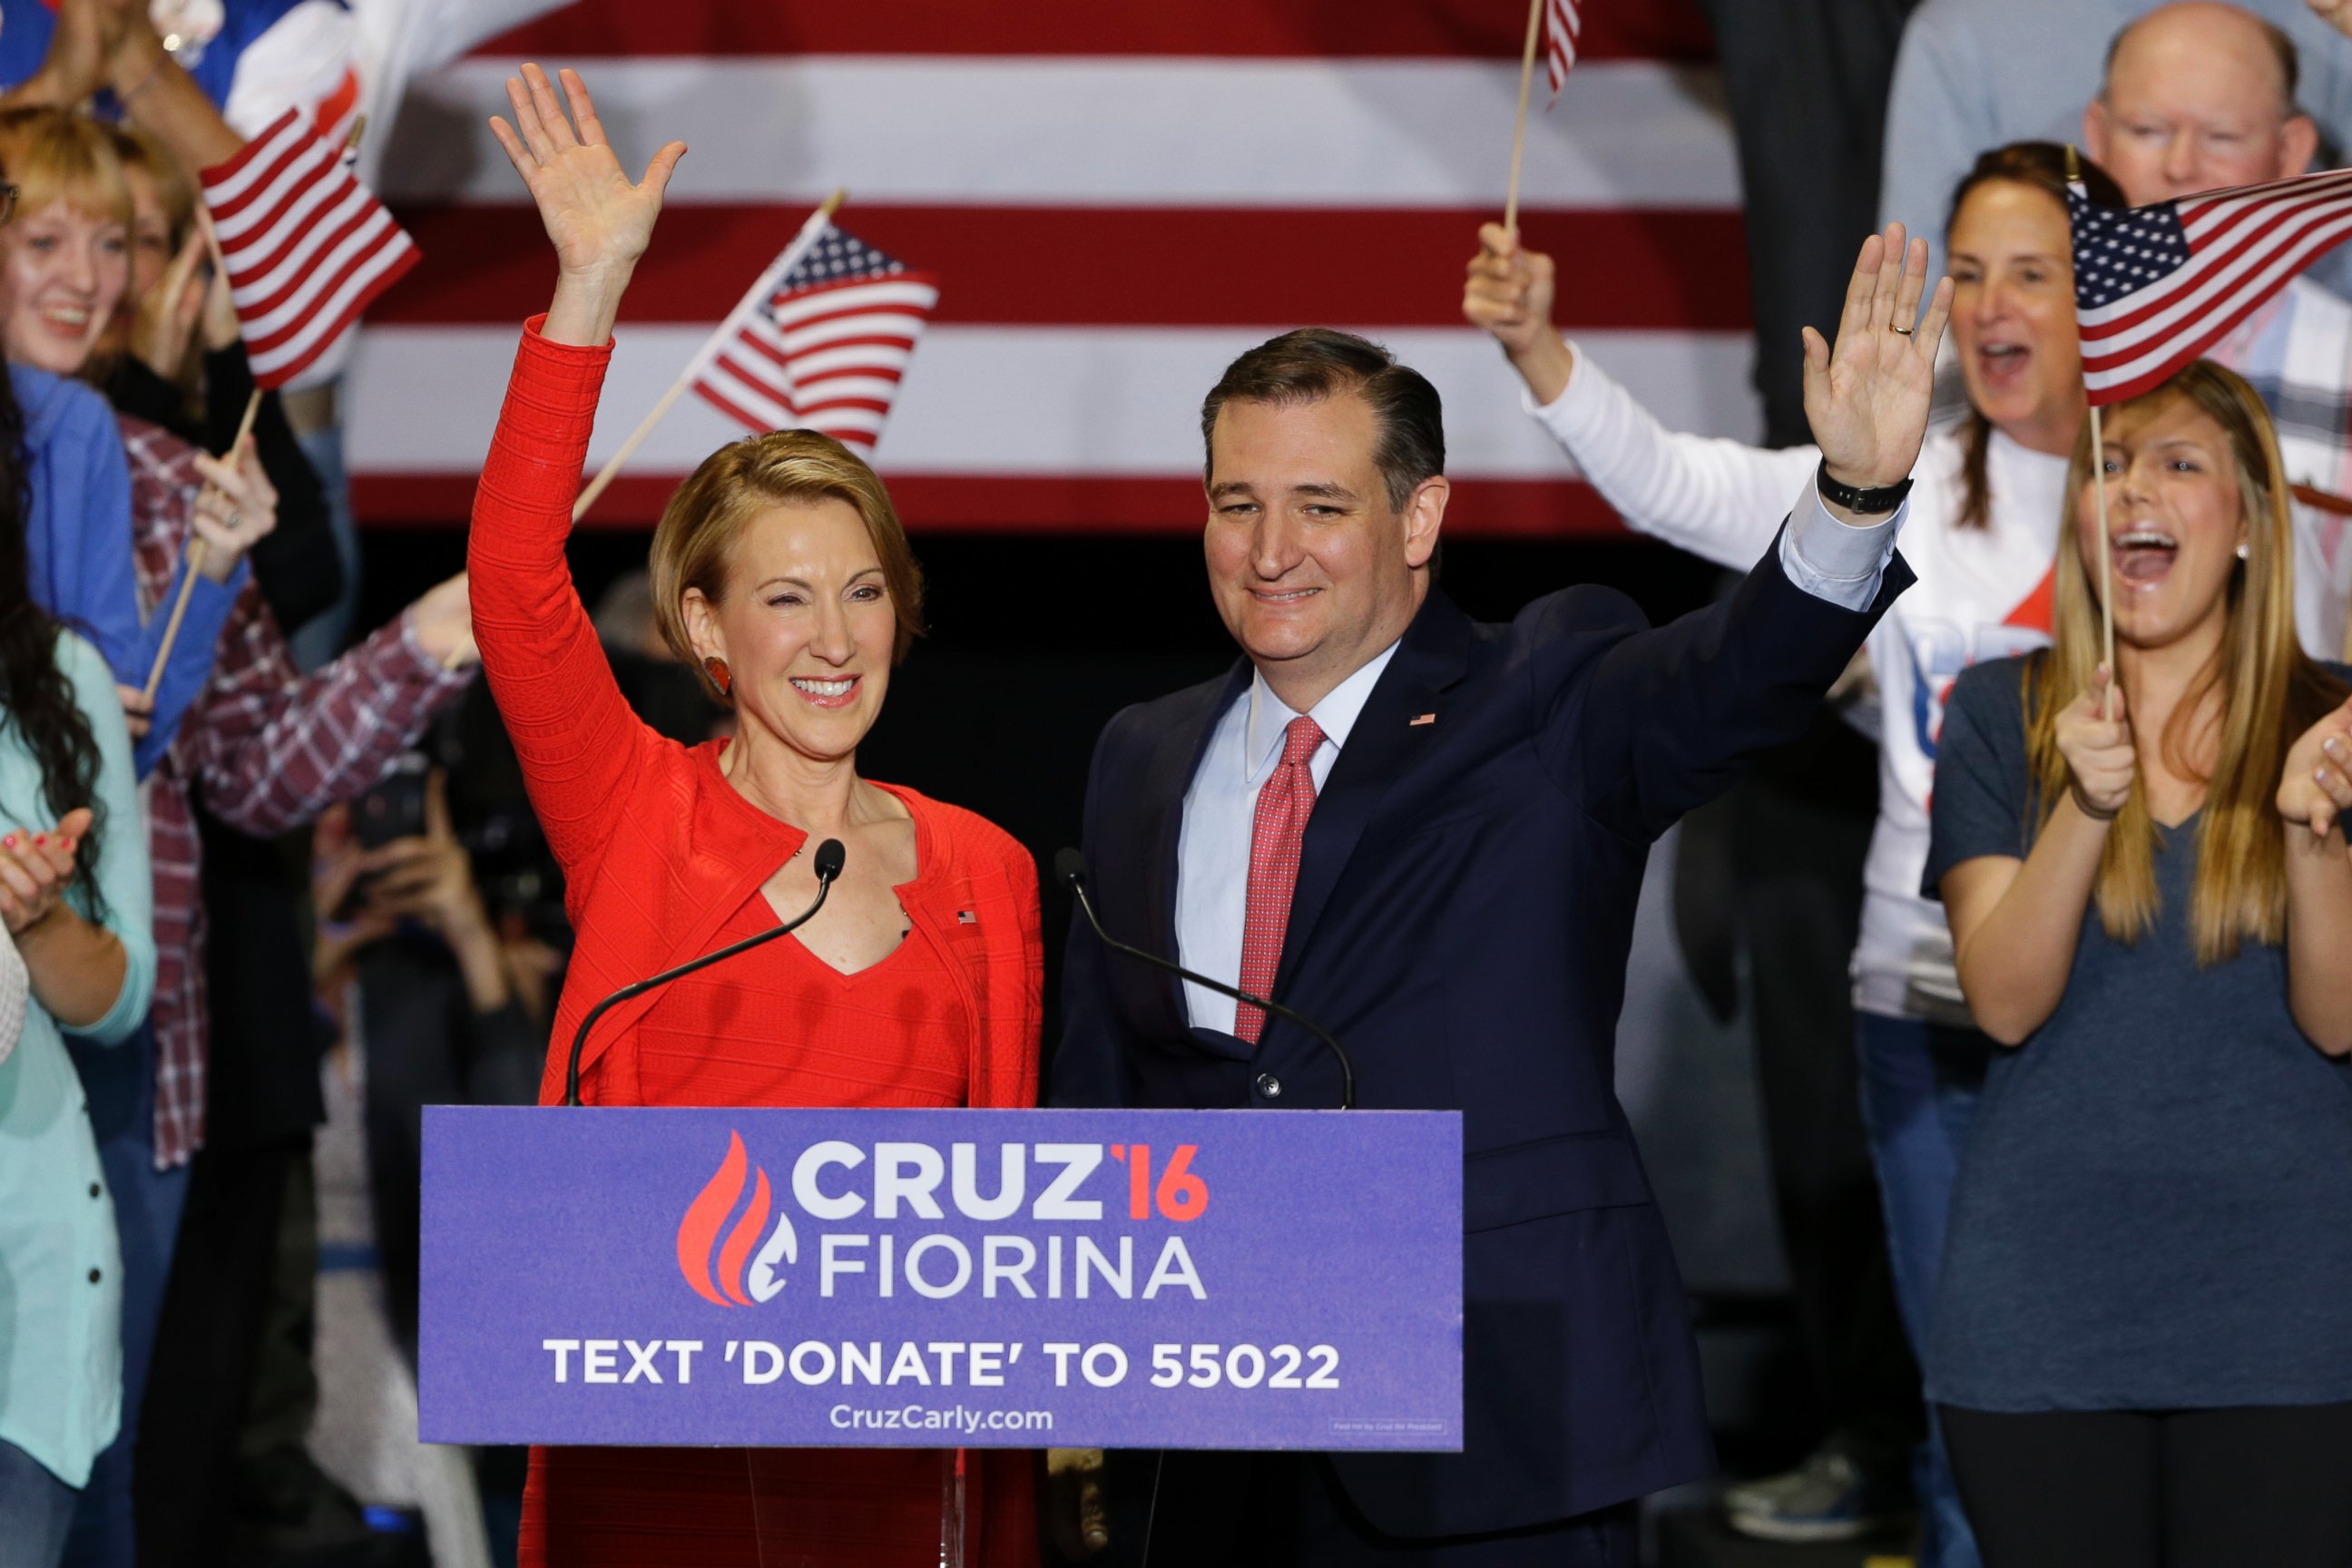 Republican presidential candidate Sen. Ted Cruz, R-Texas, joined by former Hewlett-Packard CEO Carly Fiorina waves during a rally in Indianapolis, April 27, 2016, after Cruz announced he had tapped Fiorina to serve as his running mate. 